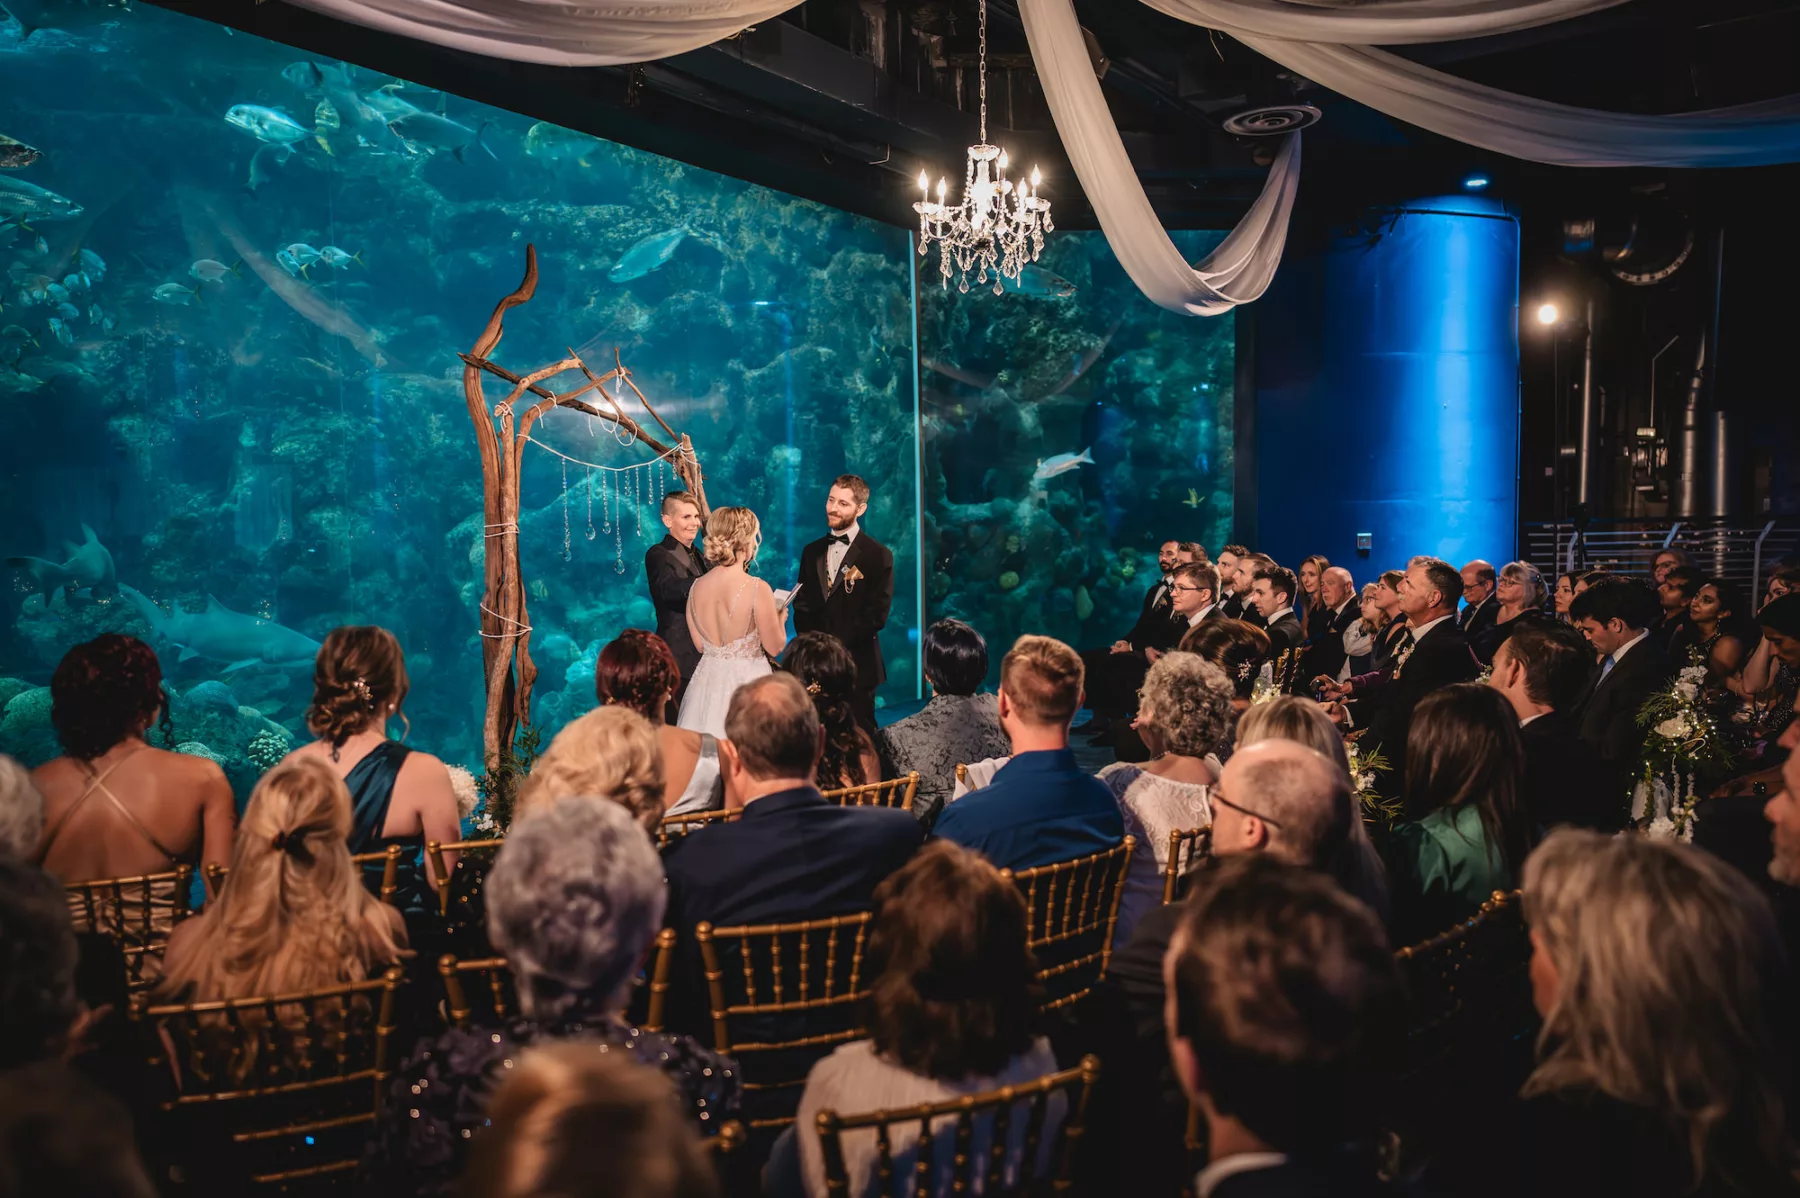 Nautical Inspired Coral Reef Gallery Fall Wedding Ceremony | Drift Wood Arch Ideas | Tampa Bay Event Venue The Florida Aquarium